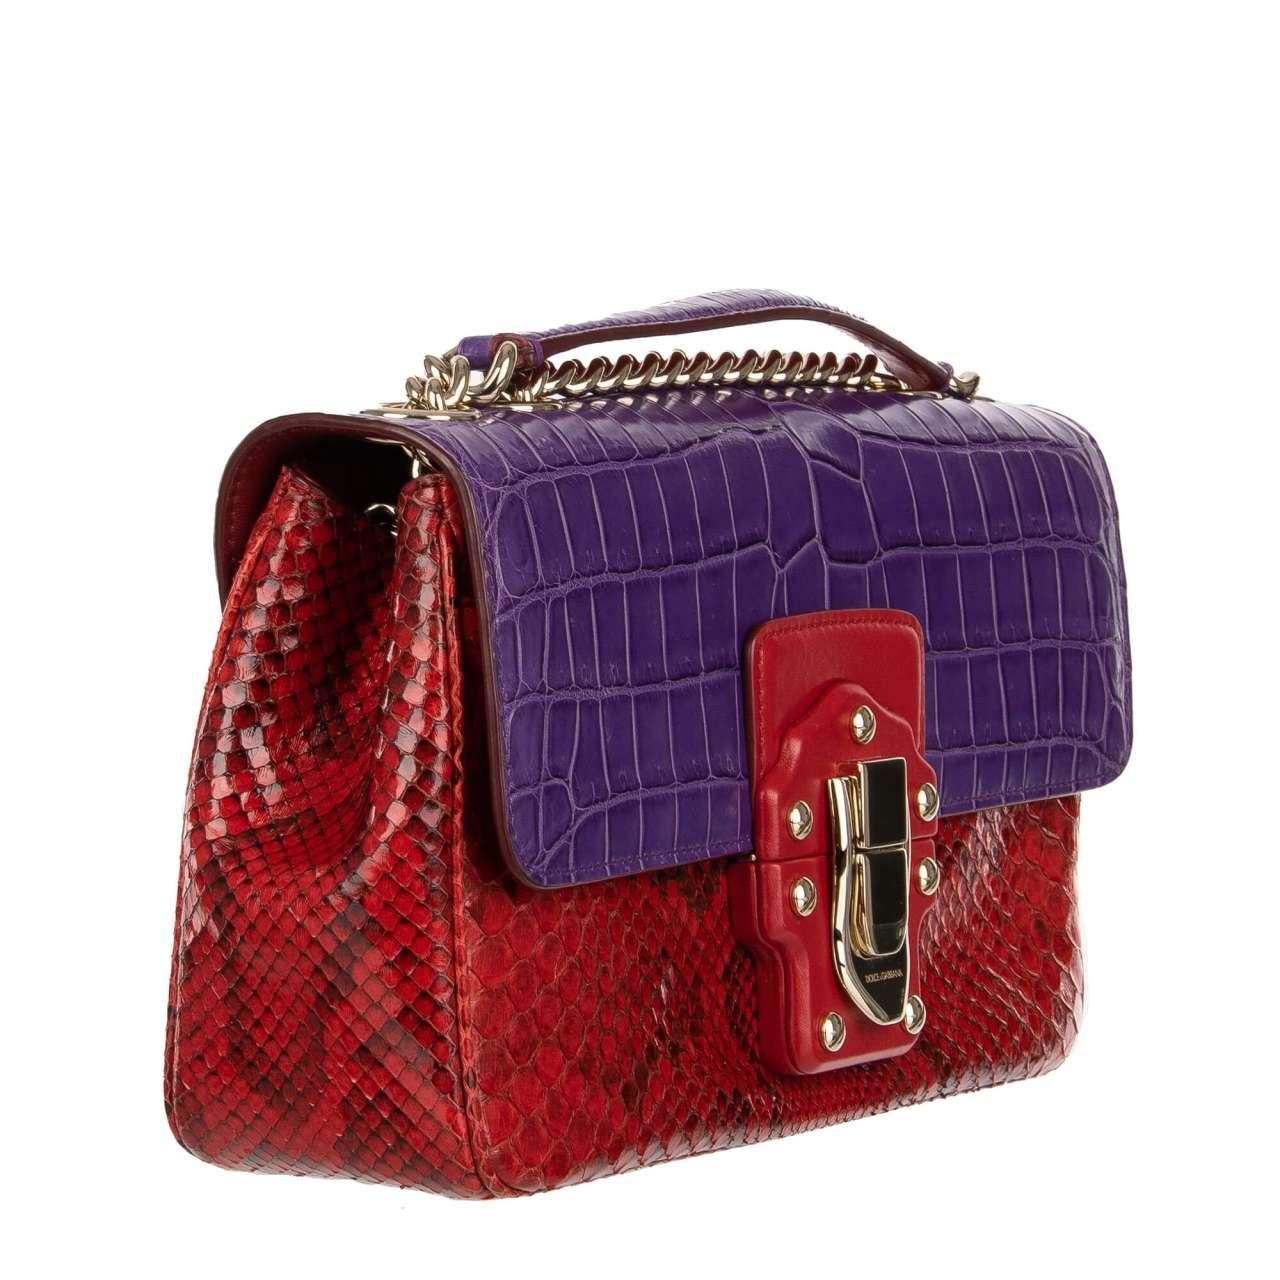 D&G Croco Snake Leather Shoulder Bag LUCIA with Chain Strap Red Purple In Excellent Condition For Sale In Erkrath, DE